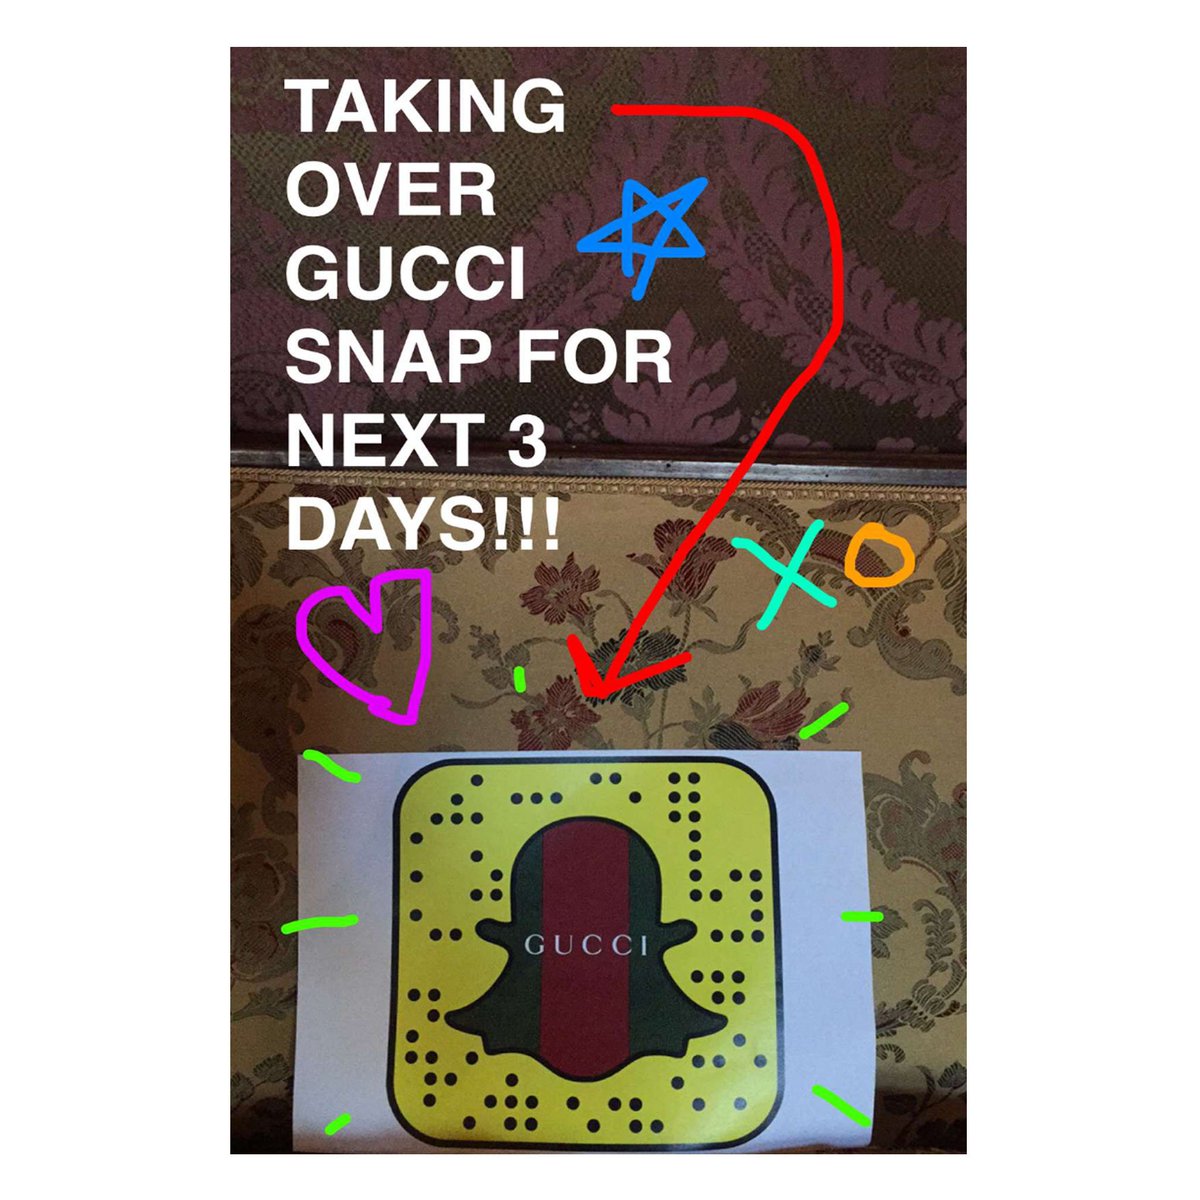 RT @gucci: It’s a takeover. @JaredLeto is live on #Gucci’s #Snapchat account. #GuiltyNotGuilty https://t.co/yyYY0oFUJ3